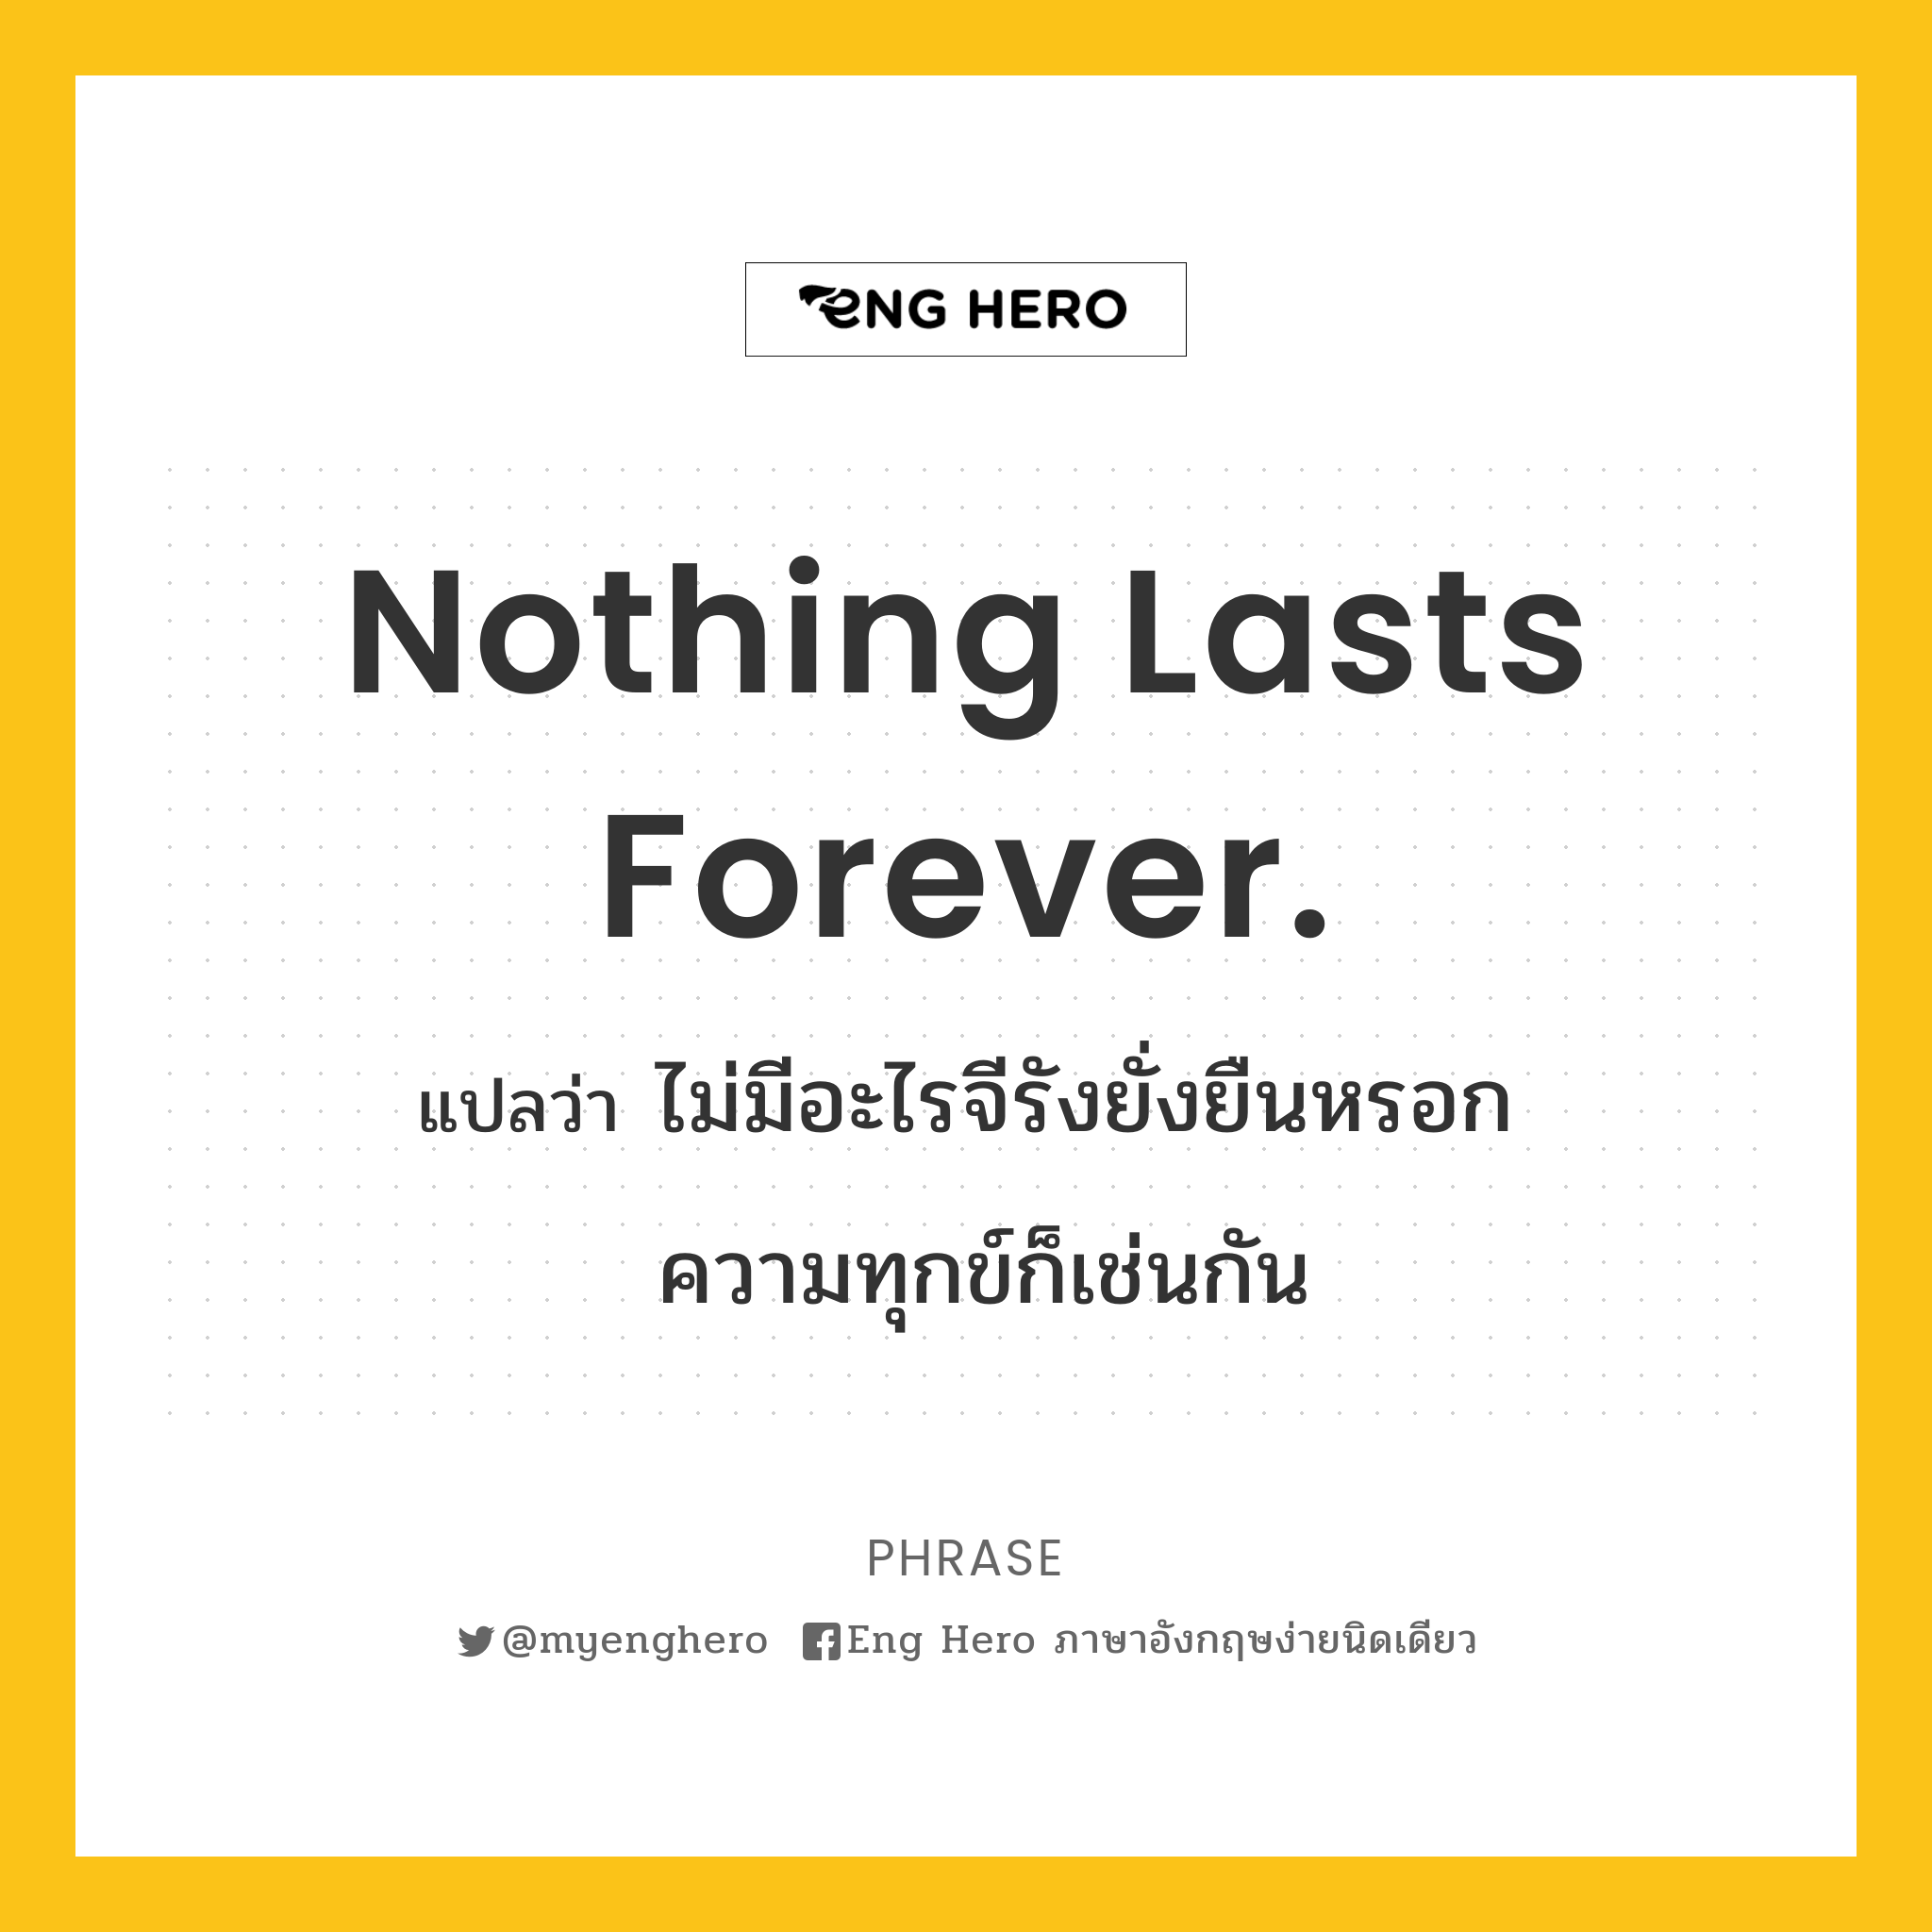 Nothing lasts forever.